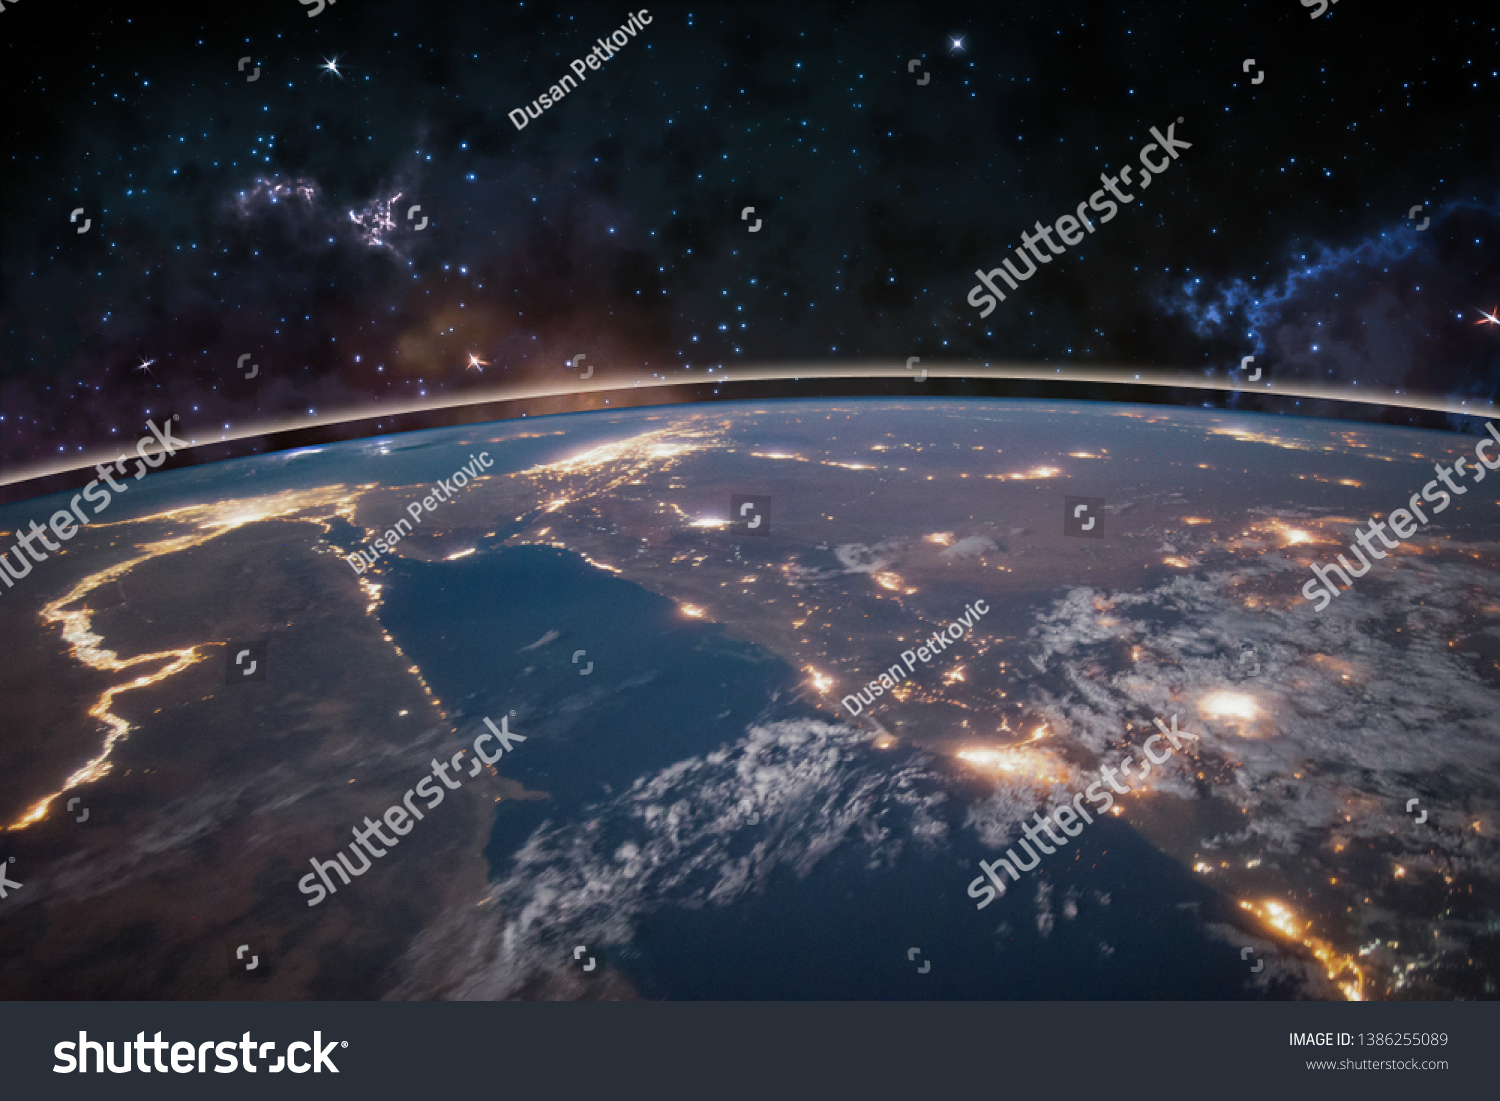 Picture of Earth in space, stars all around, night sky. Elements of this image furnished by NASA. #1386255089